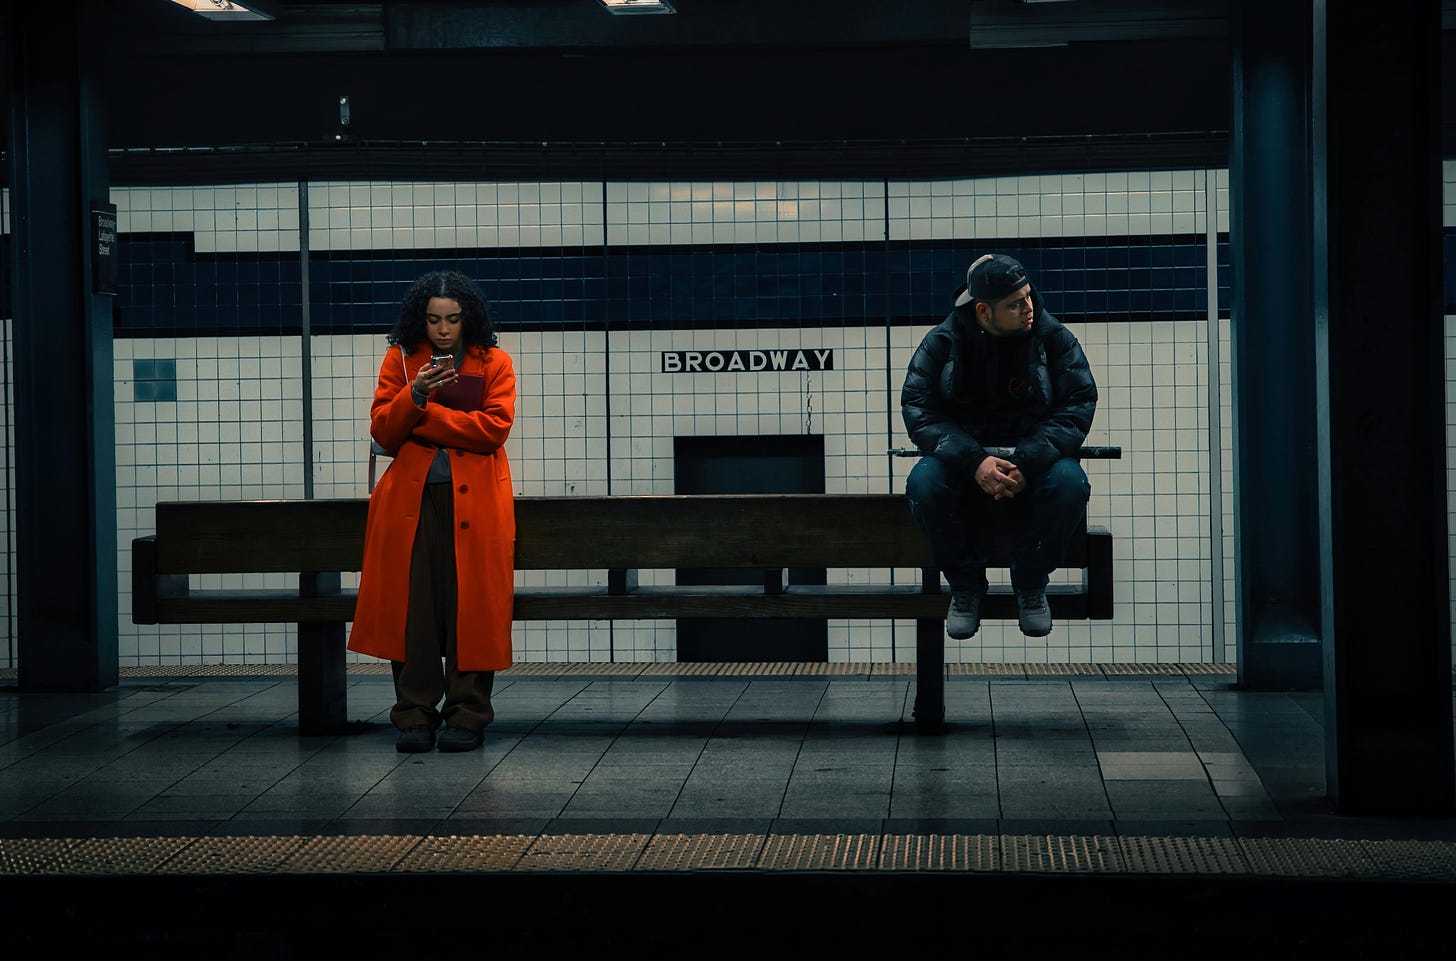 Man and woman at a distance from one another in subway station